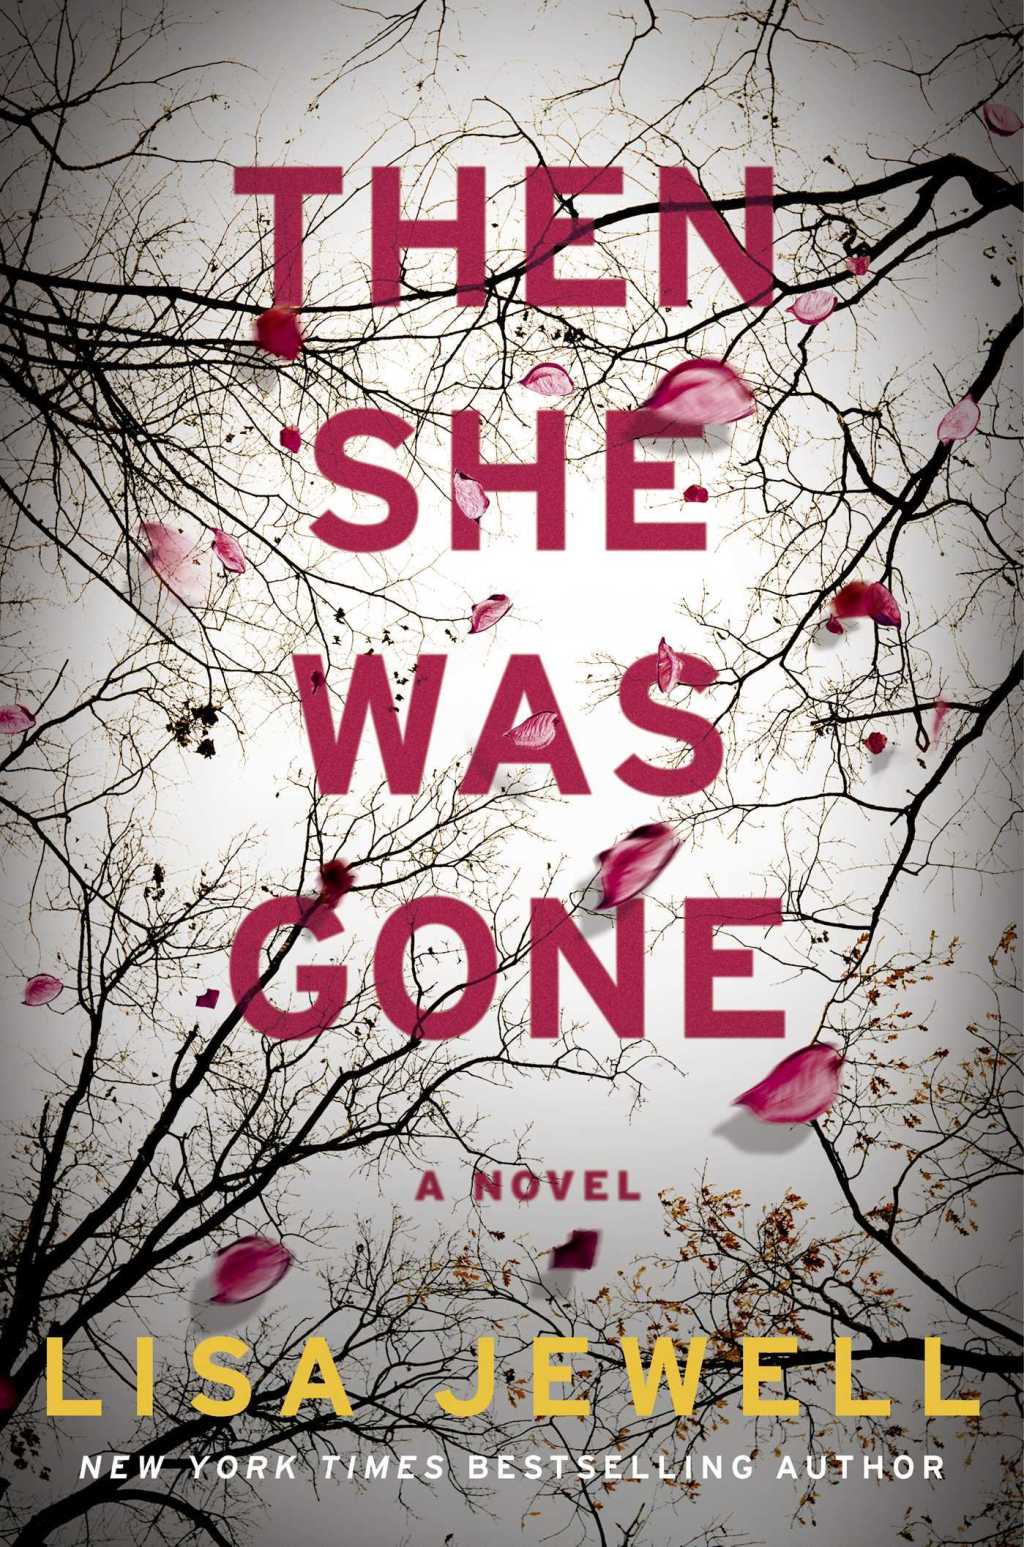 Book Review of “Then She Was Gone” by Lisa Jewell